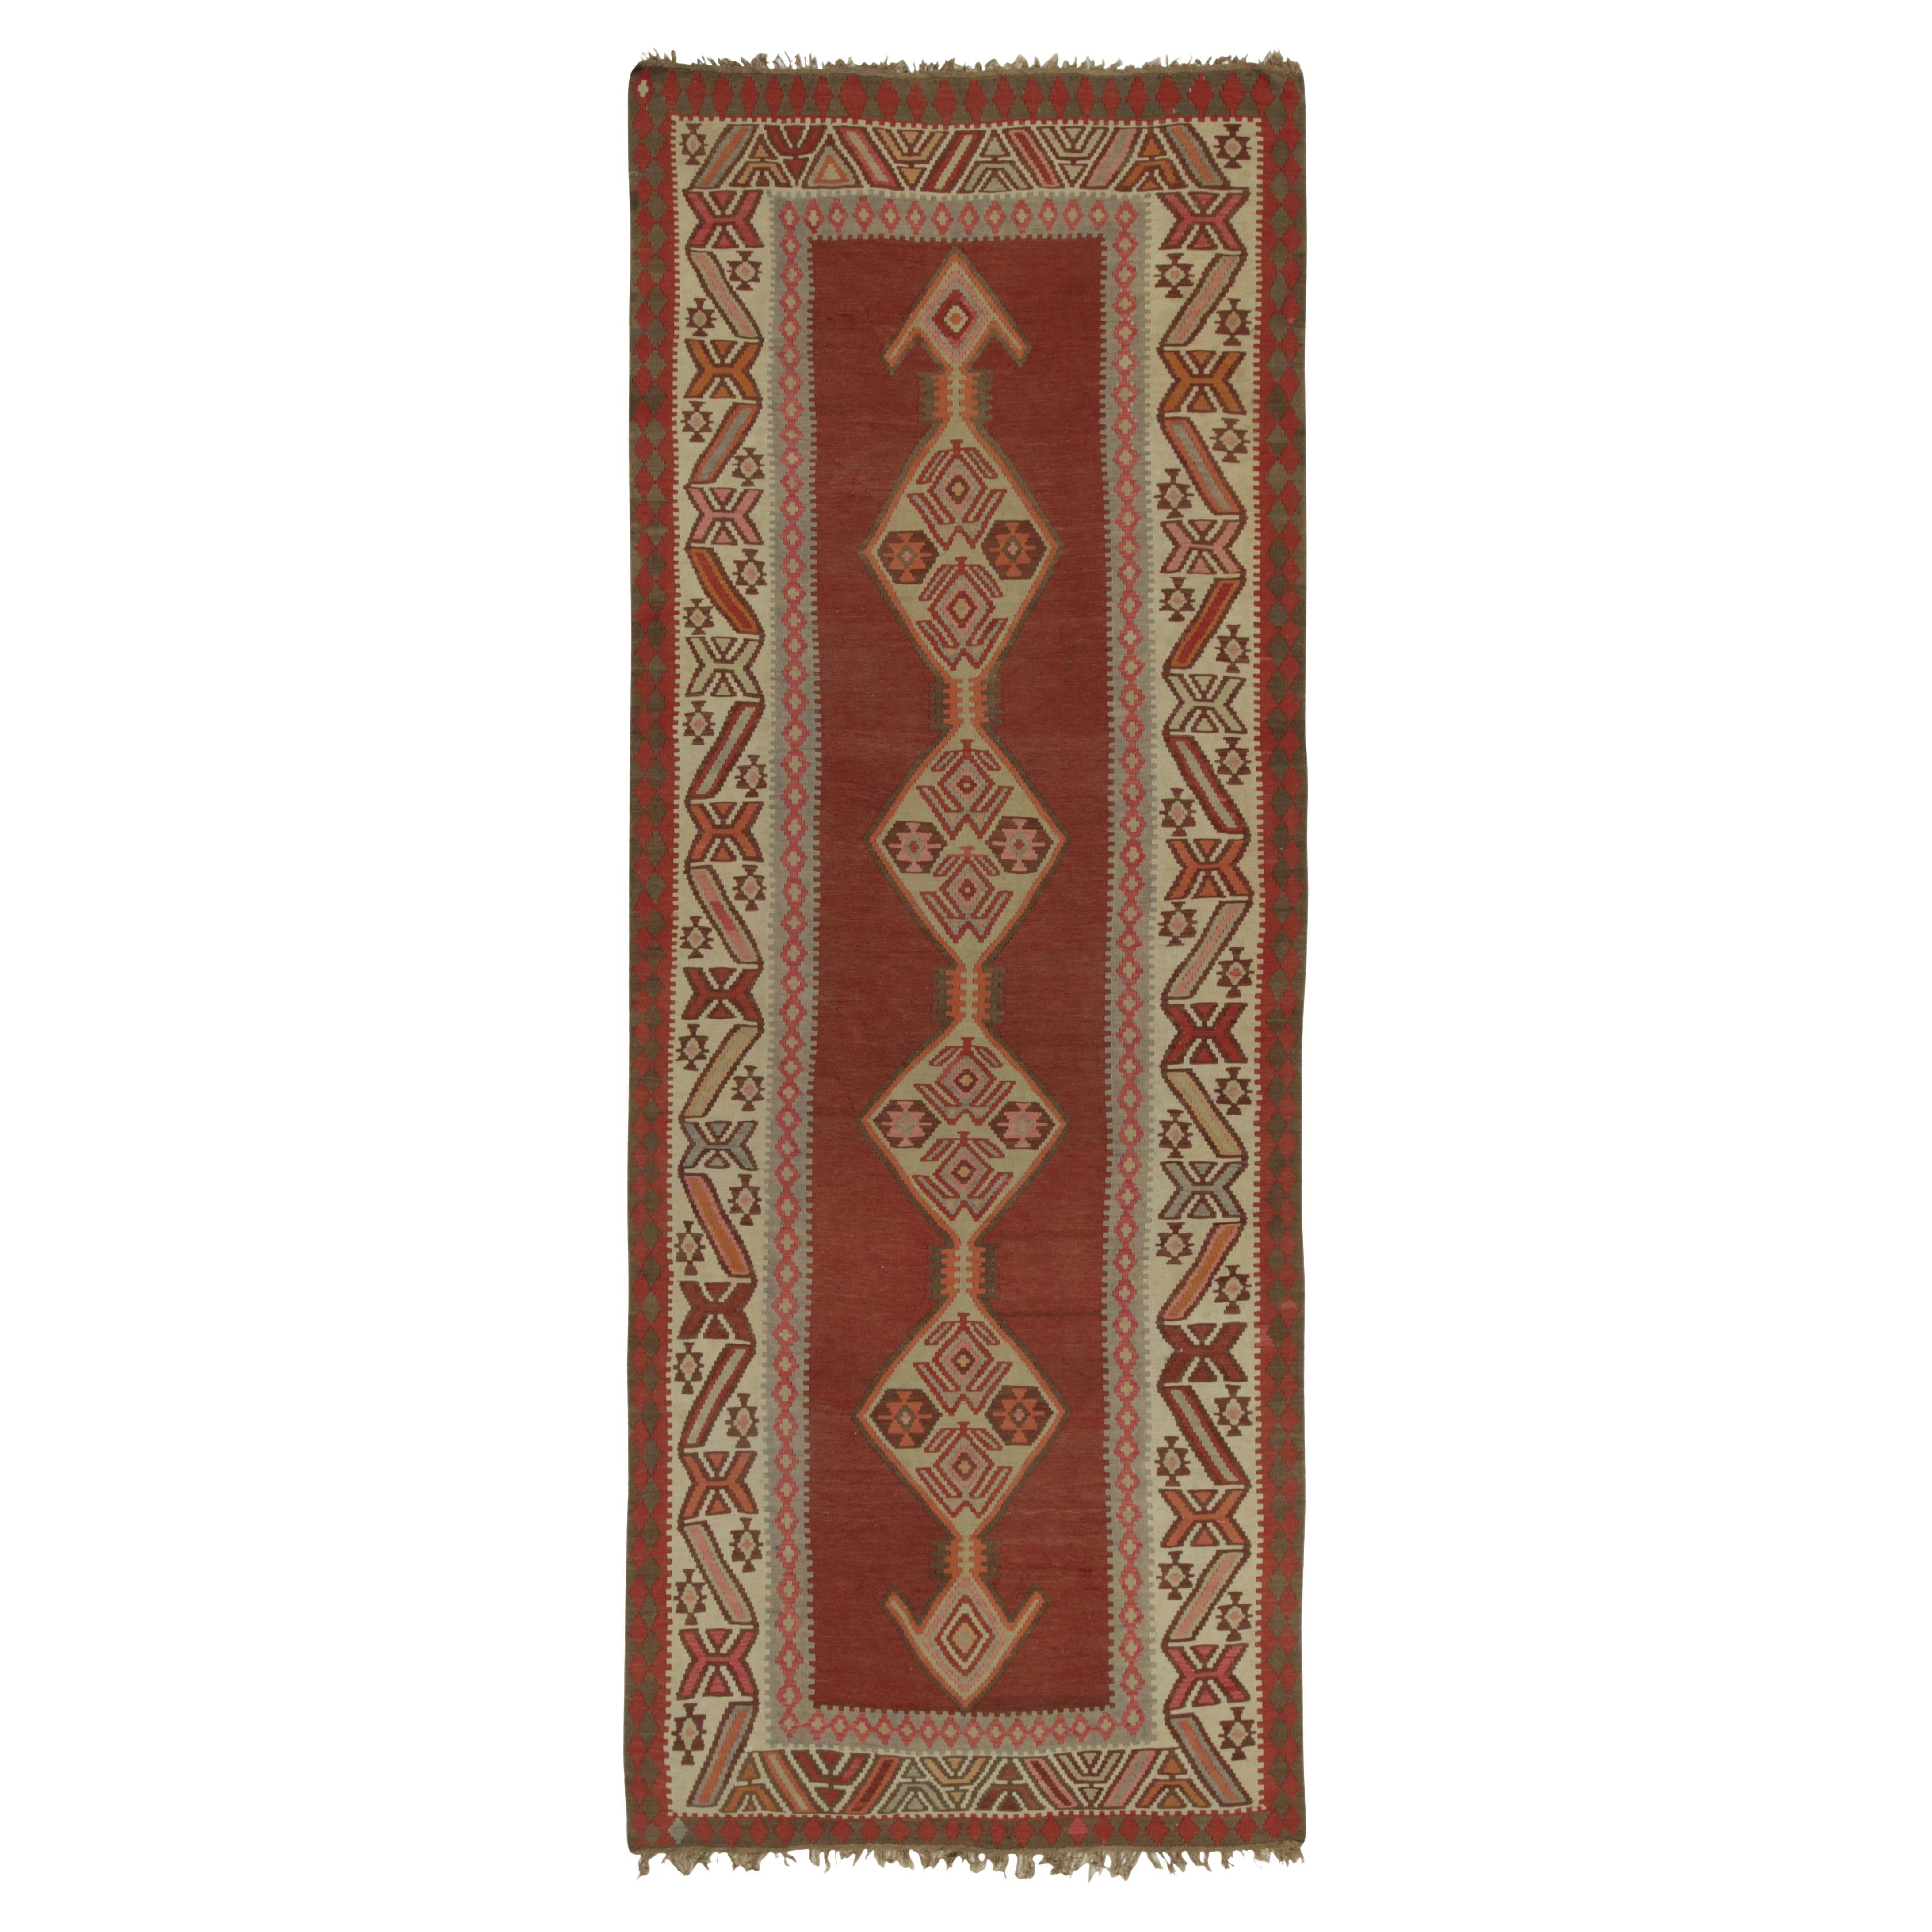 Vintage Persian Kilim in Brick Red with Polychromatic Medallions by Rug & Kilim For Sale